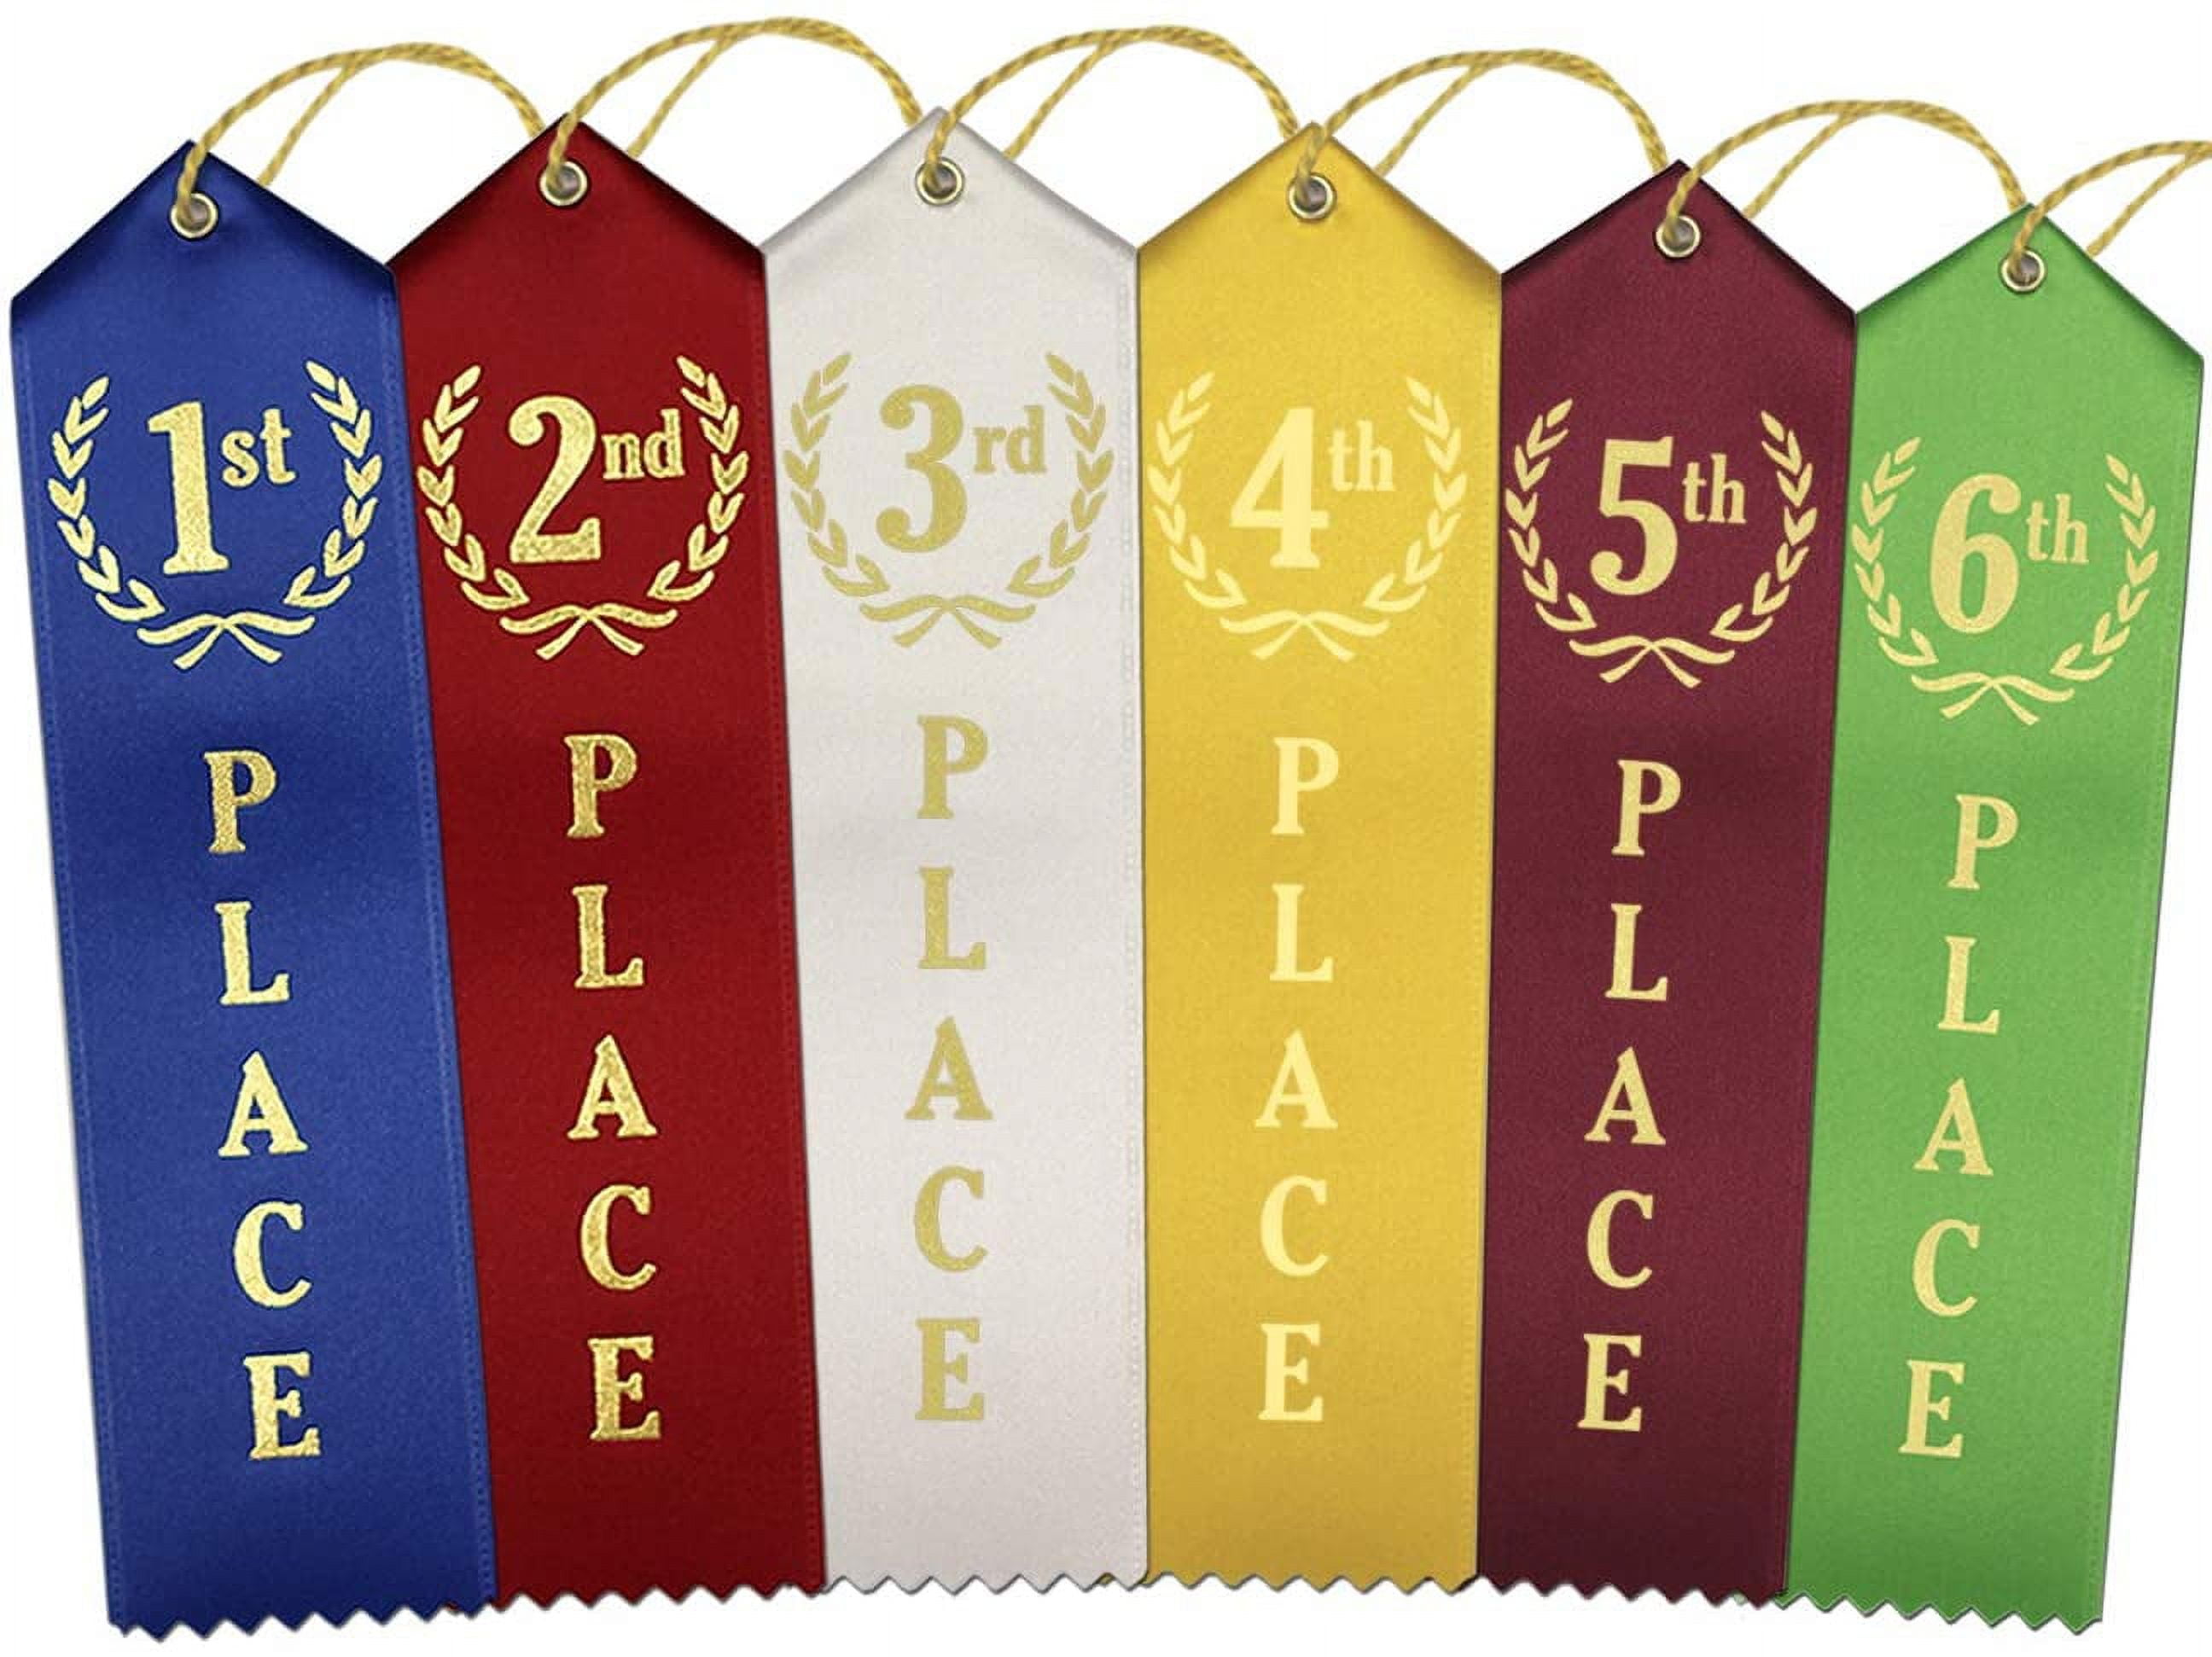 RibbonsNow 1st - 6th Place Award Ribbons - 72 Total Ribbons - 12 Each Place  with Card & String 